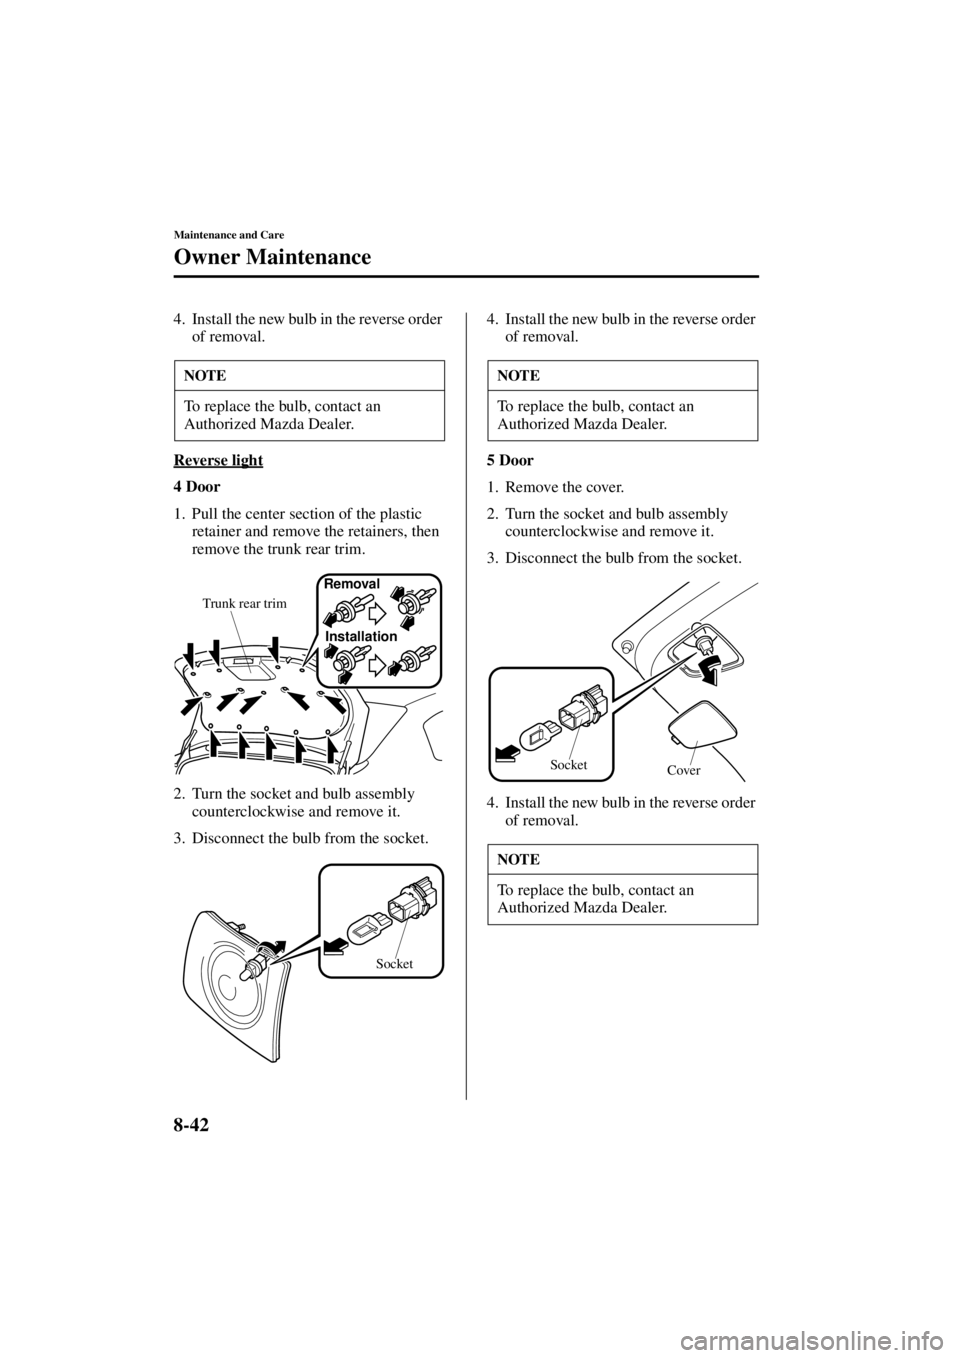 MAZDA MODEL 3 5-DOOR 2004 User Guide 8-42
Maintenance and Care
Owner Maintenance
Form No. 8S18-EA-03I
4. Install the new bulb in the reverse order of removal.
Reverse light
4 Door
1. Pull the center section of the plastic  retainer and r